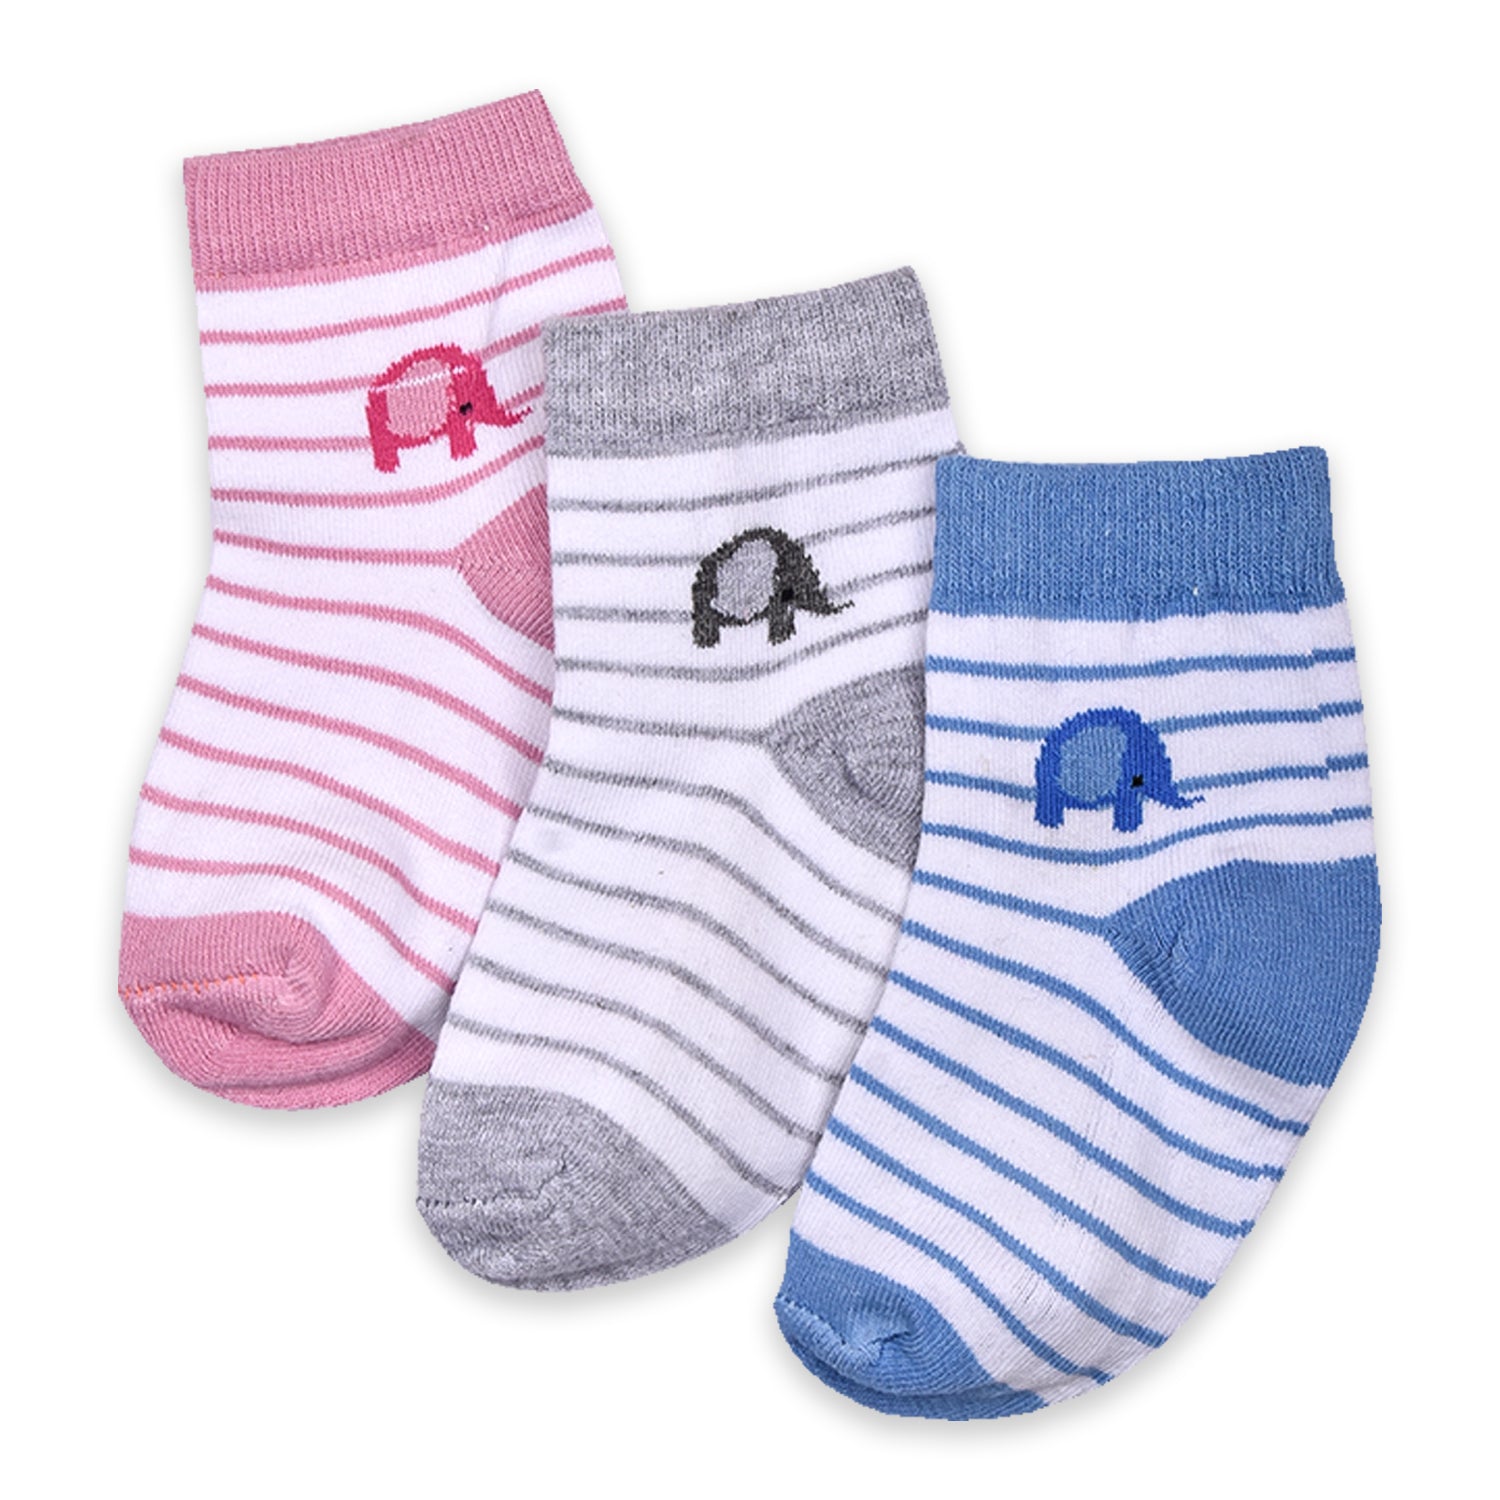 FOOTPRINTS Baby's Organic Colourful Stripes Cotton Socks (6-12 Months) -Pack of 3 Pairs - Baby Eleplant